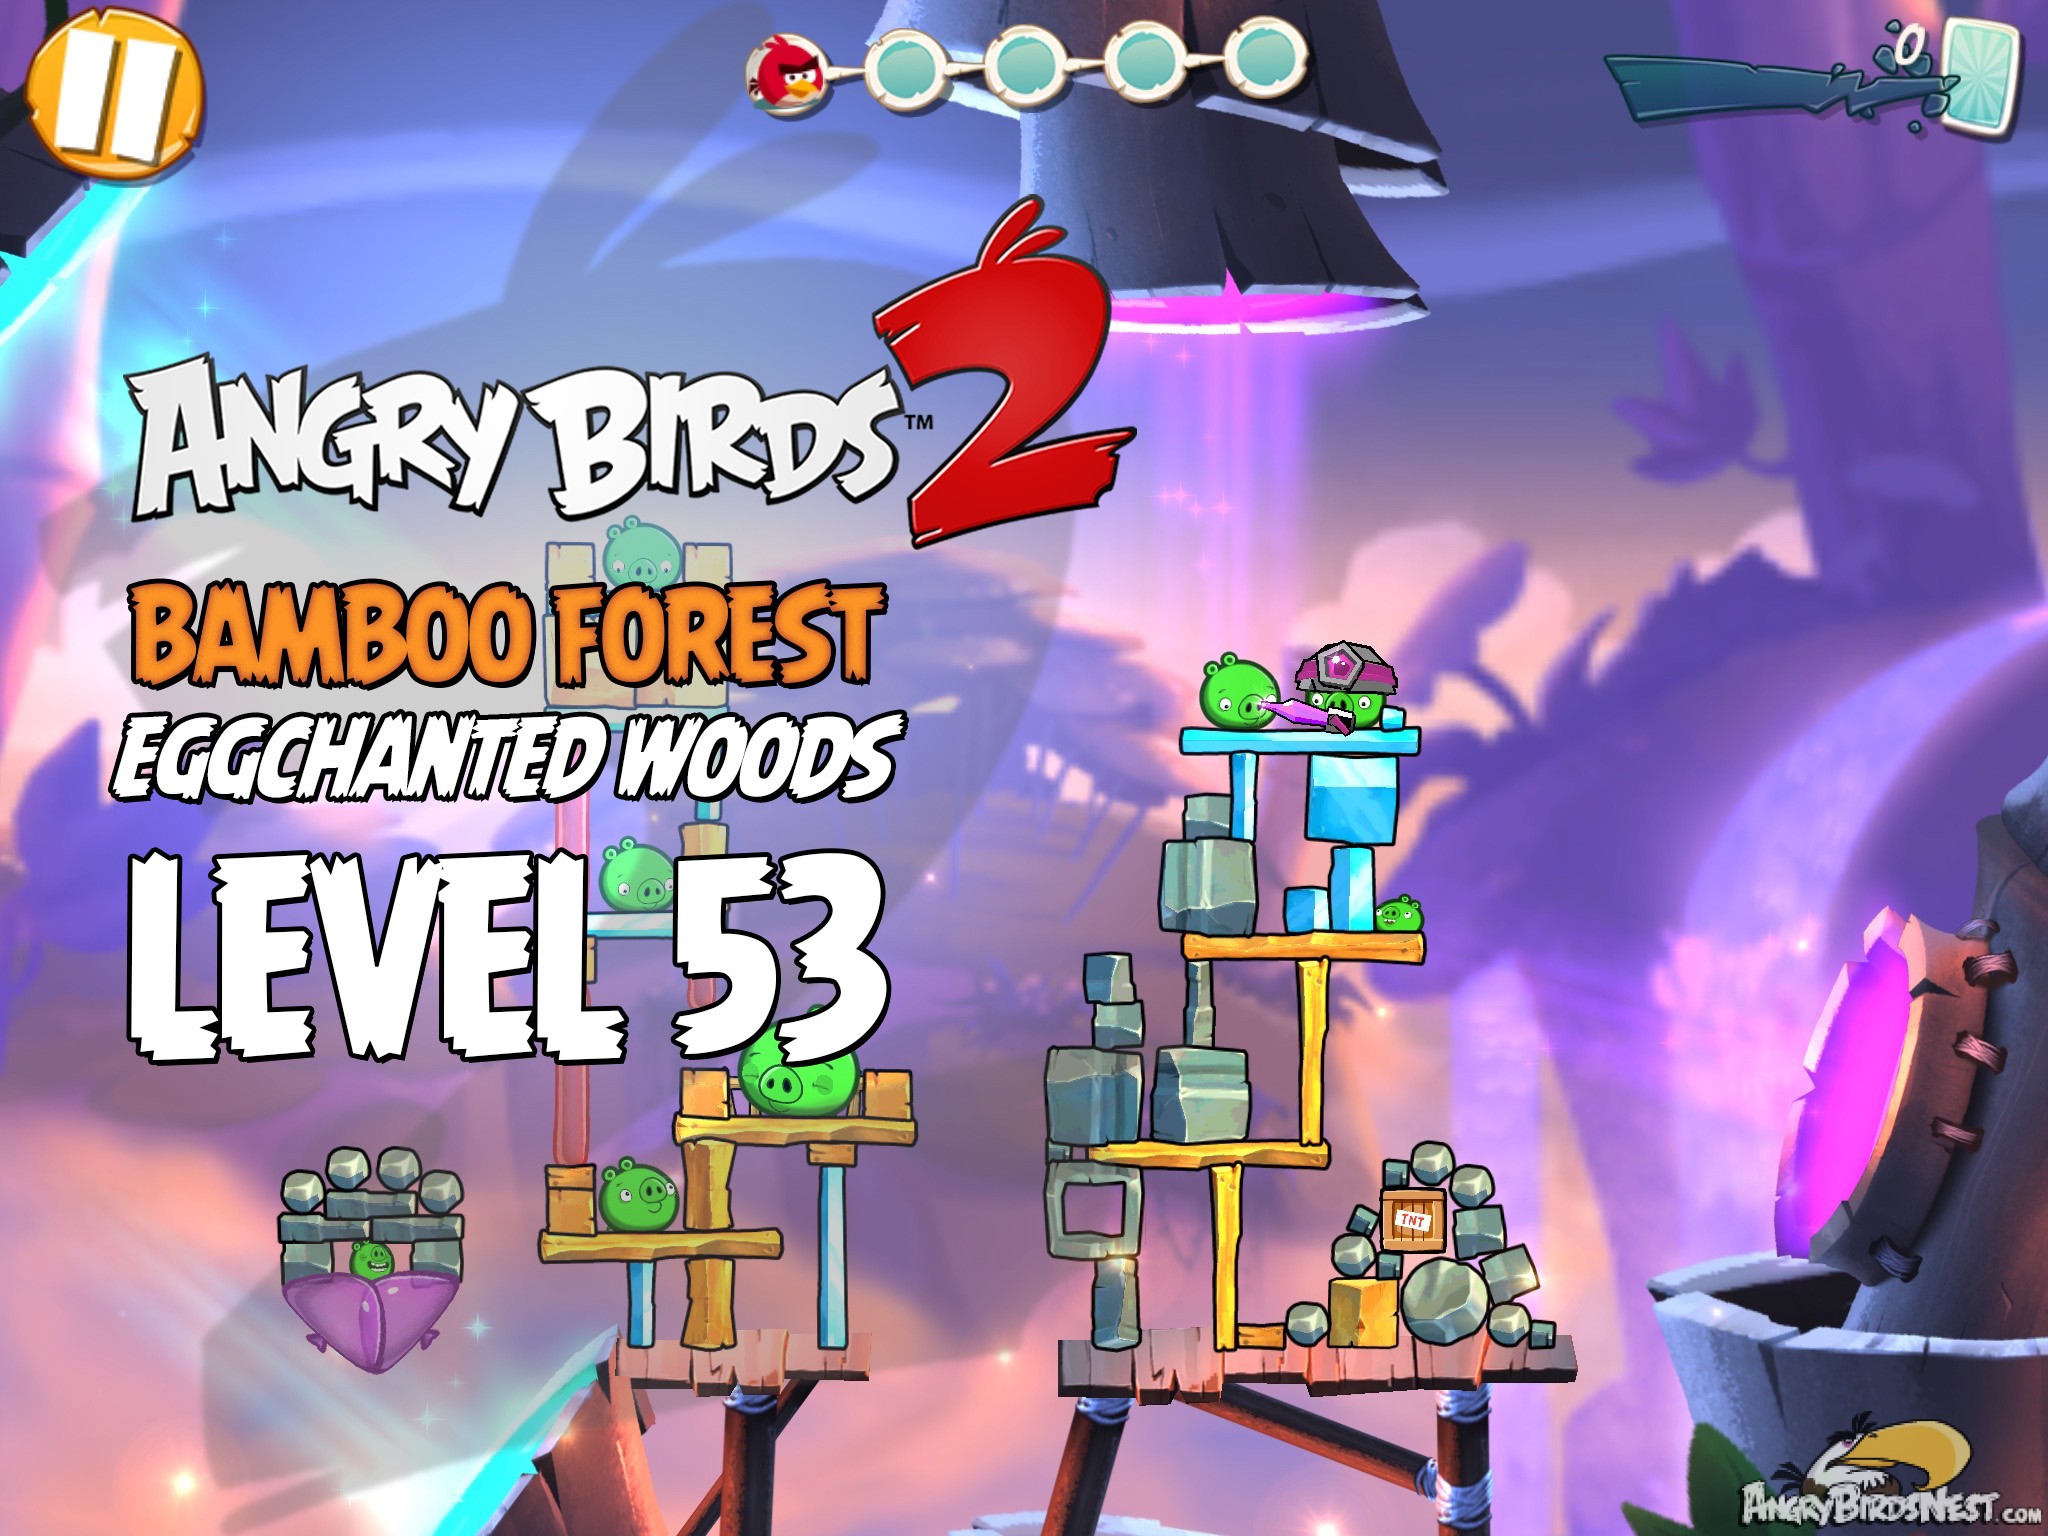 Angry Birds 2 Bamboo Forest Eggchanted Woods Level 53